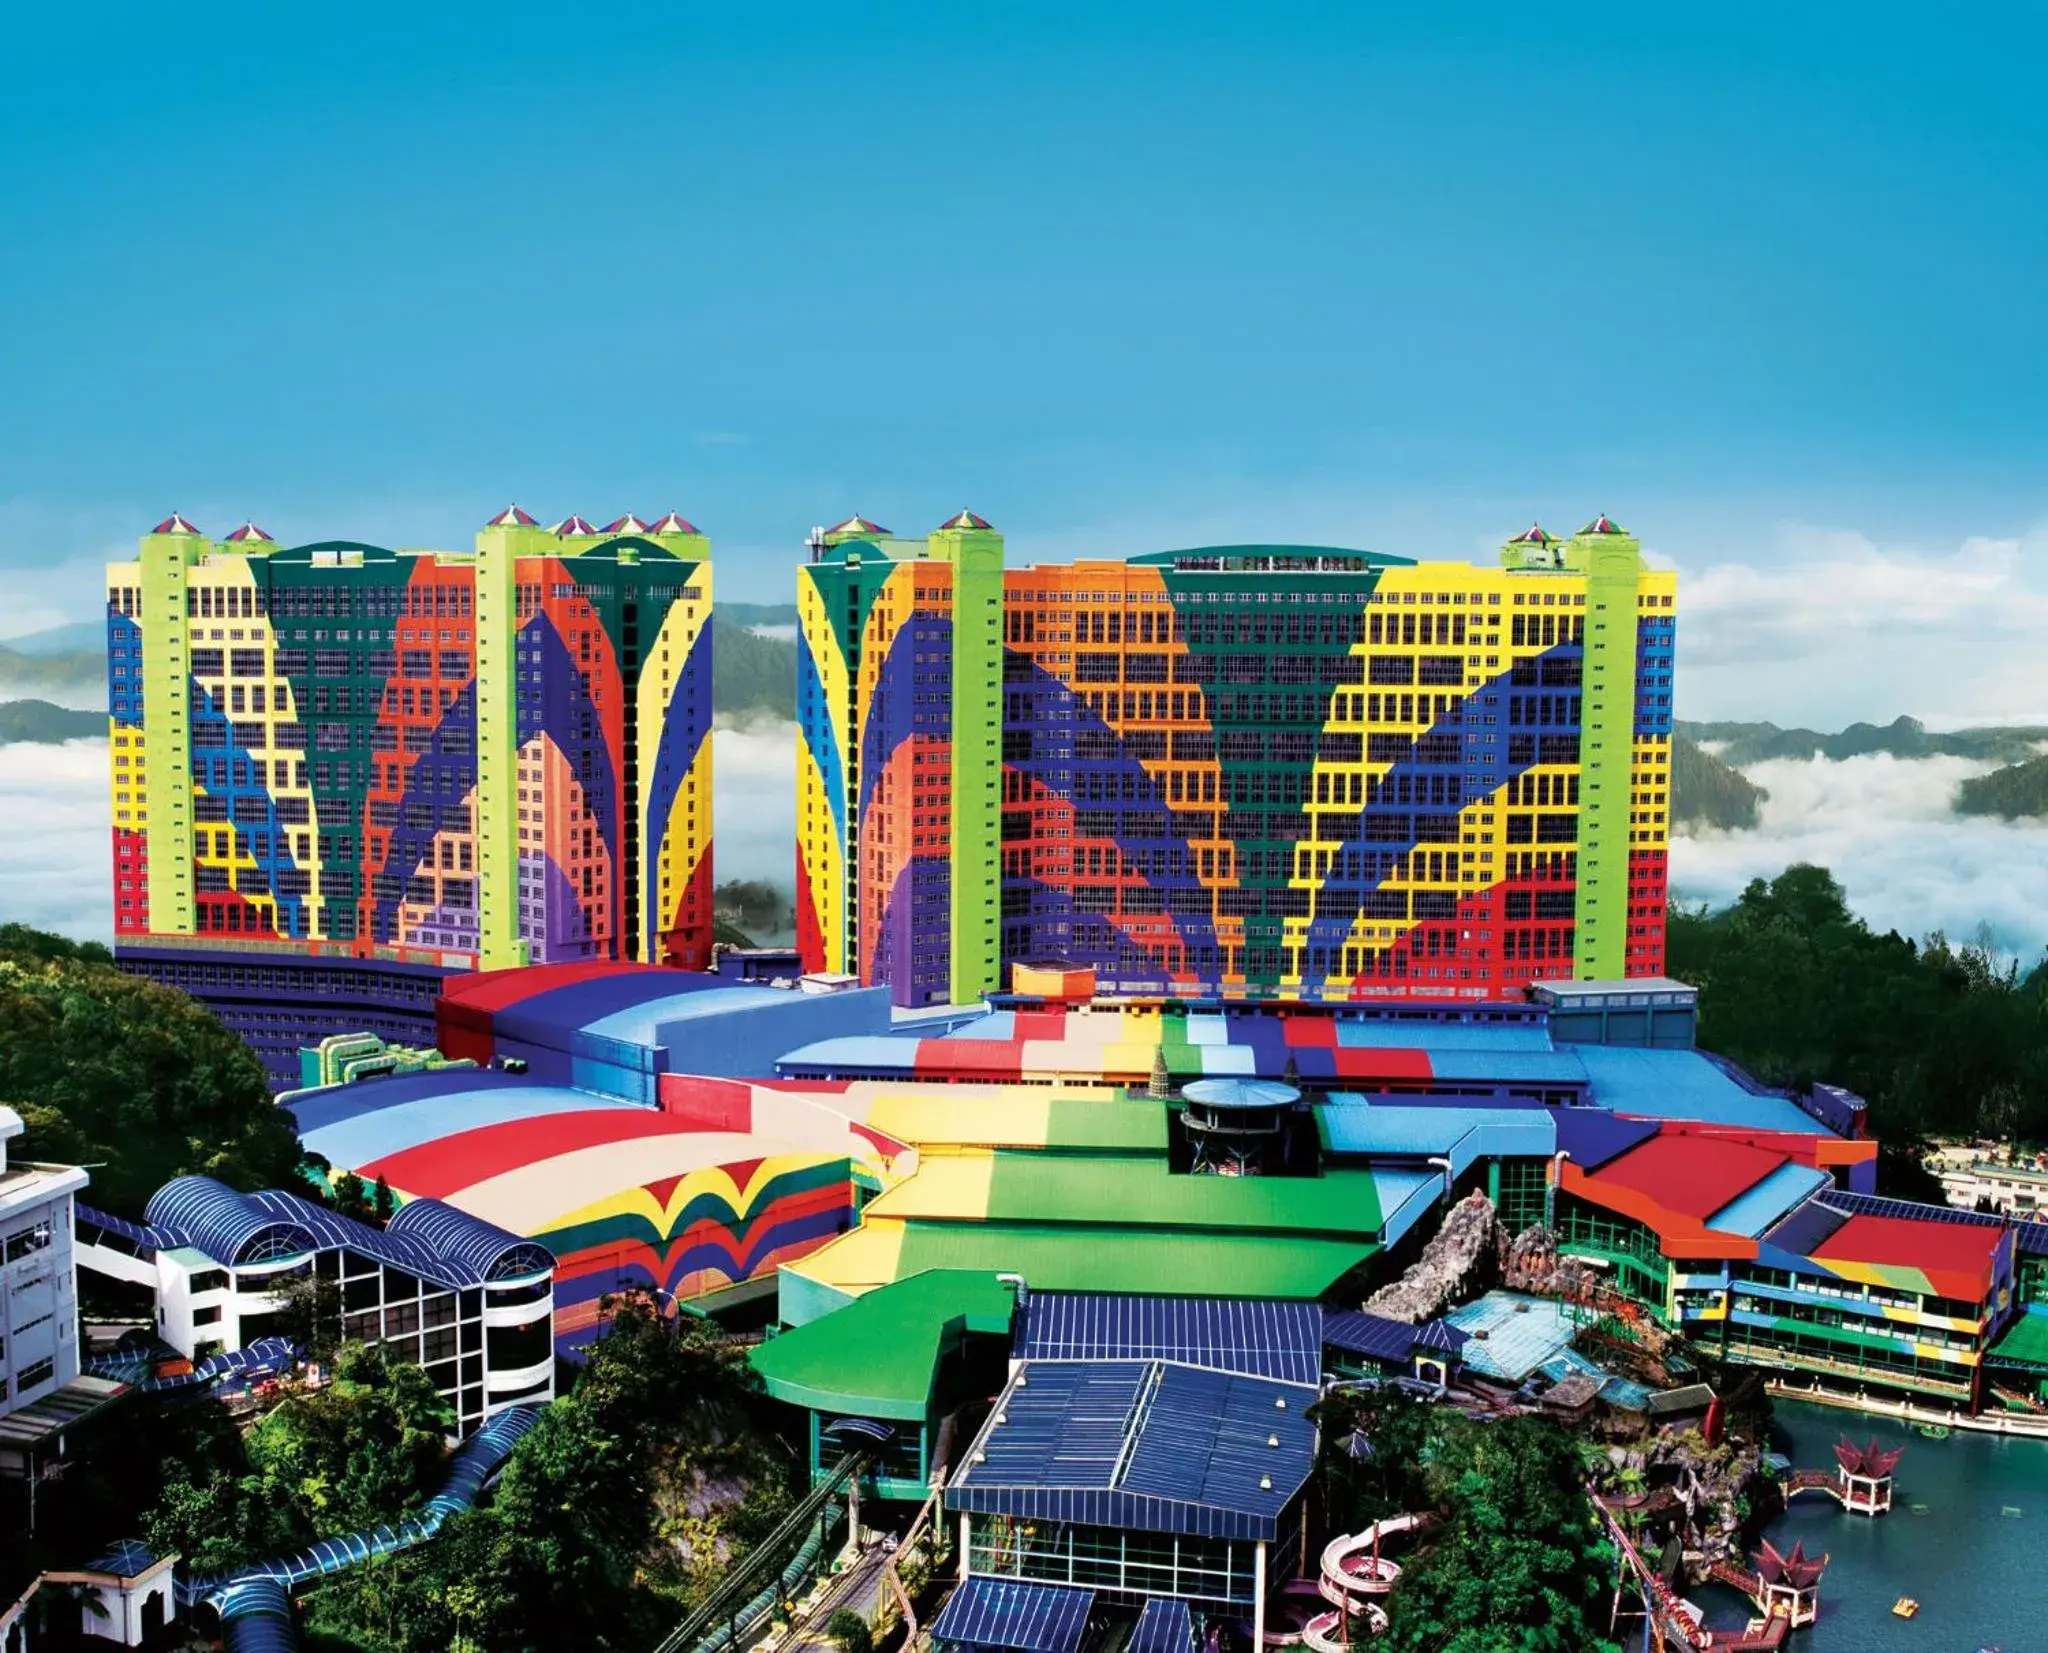 Facade/entrance in Resorts World Genting - First World Hotel